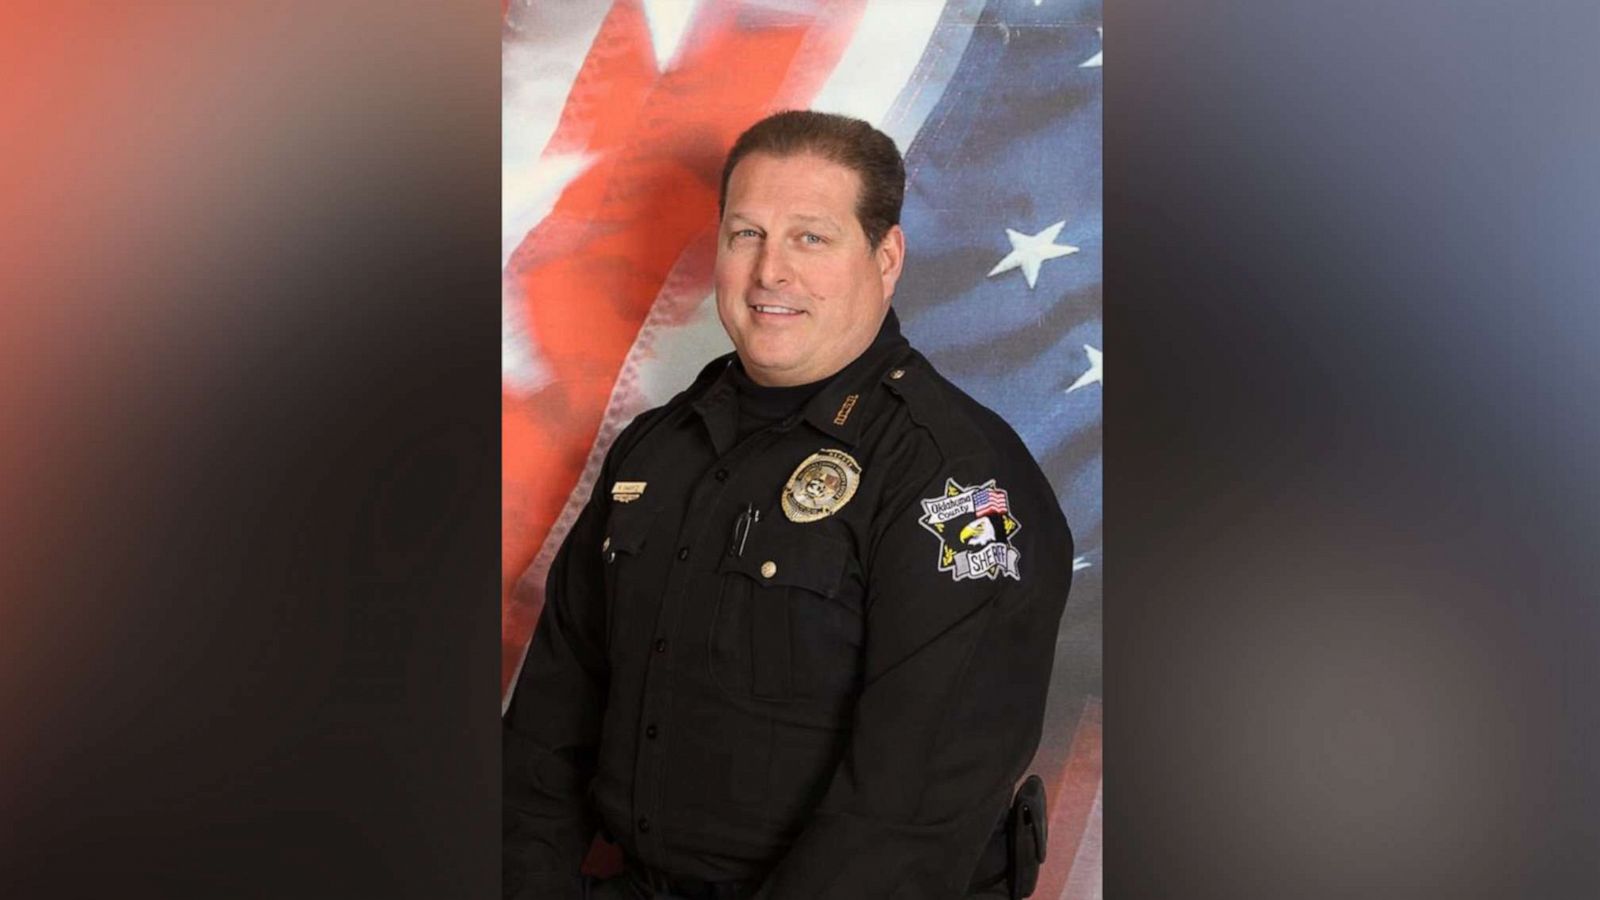 Oklahoma Sheriff’s Deputy Shot and Killed While Serving Order